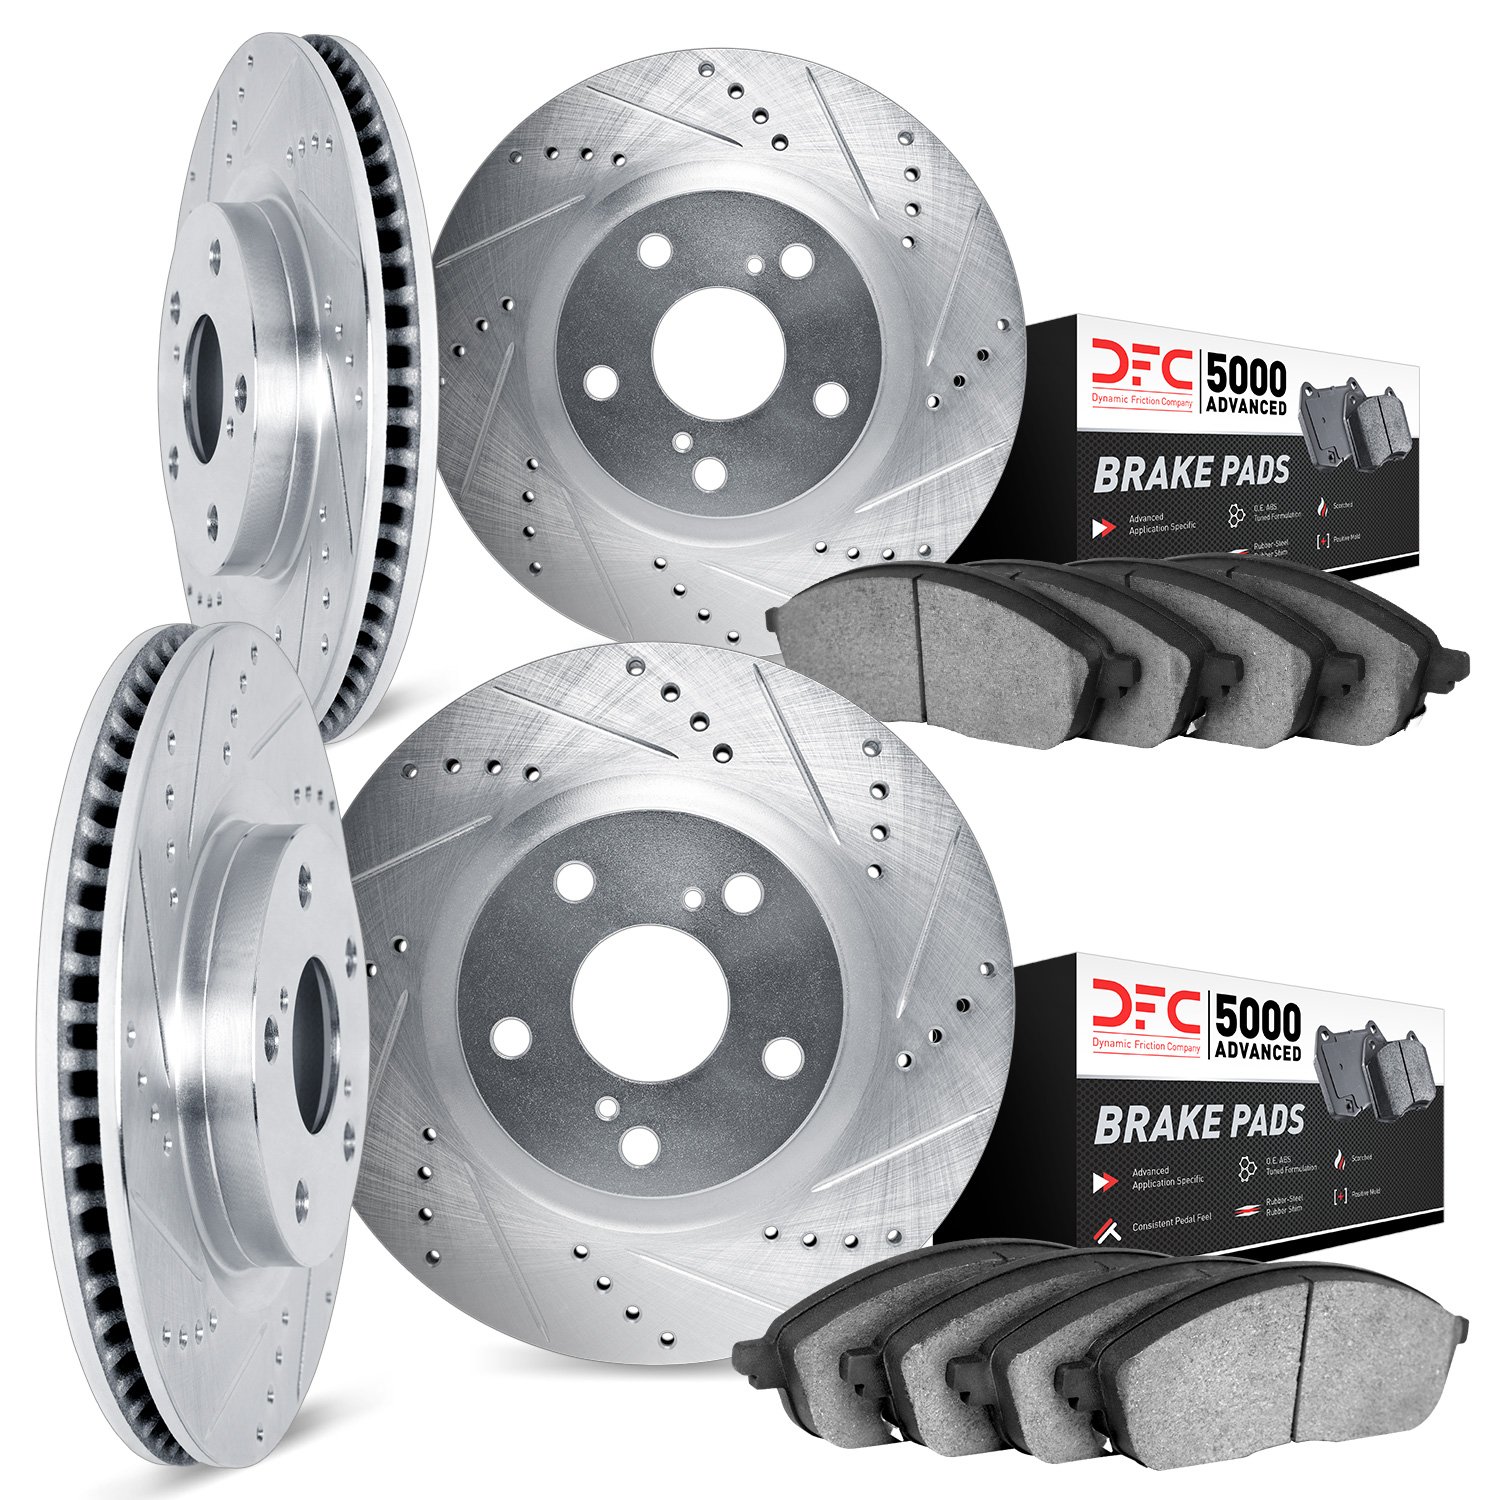 7504-75000 Drilled/Slotted Brake Rotors w/5000 Advanced Brake Pads Kit [Silver], 1993-1997 Lexus/Toyota/Scion, Position: Front a